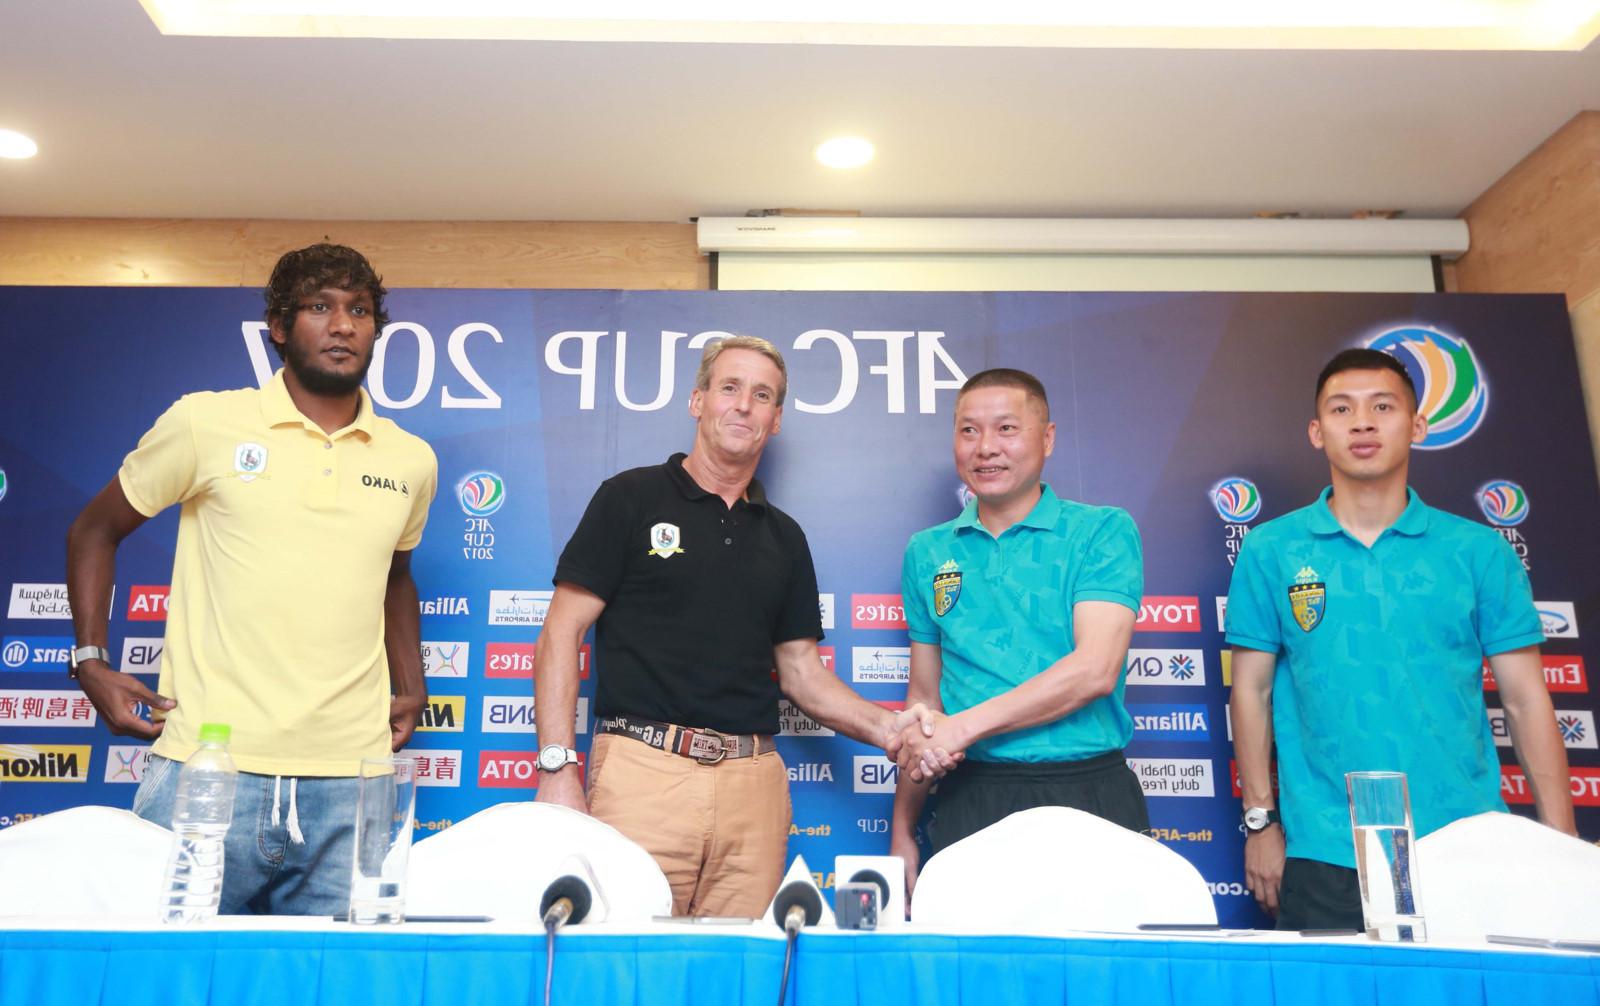  Chu Dinh Nghiem at the 2017 AFC Cup meeting